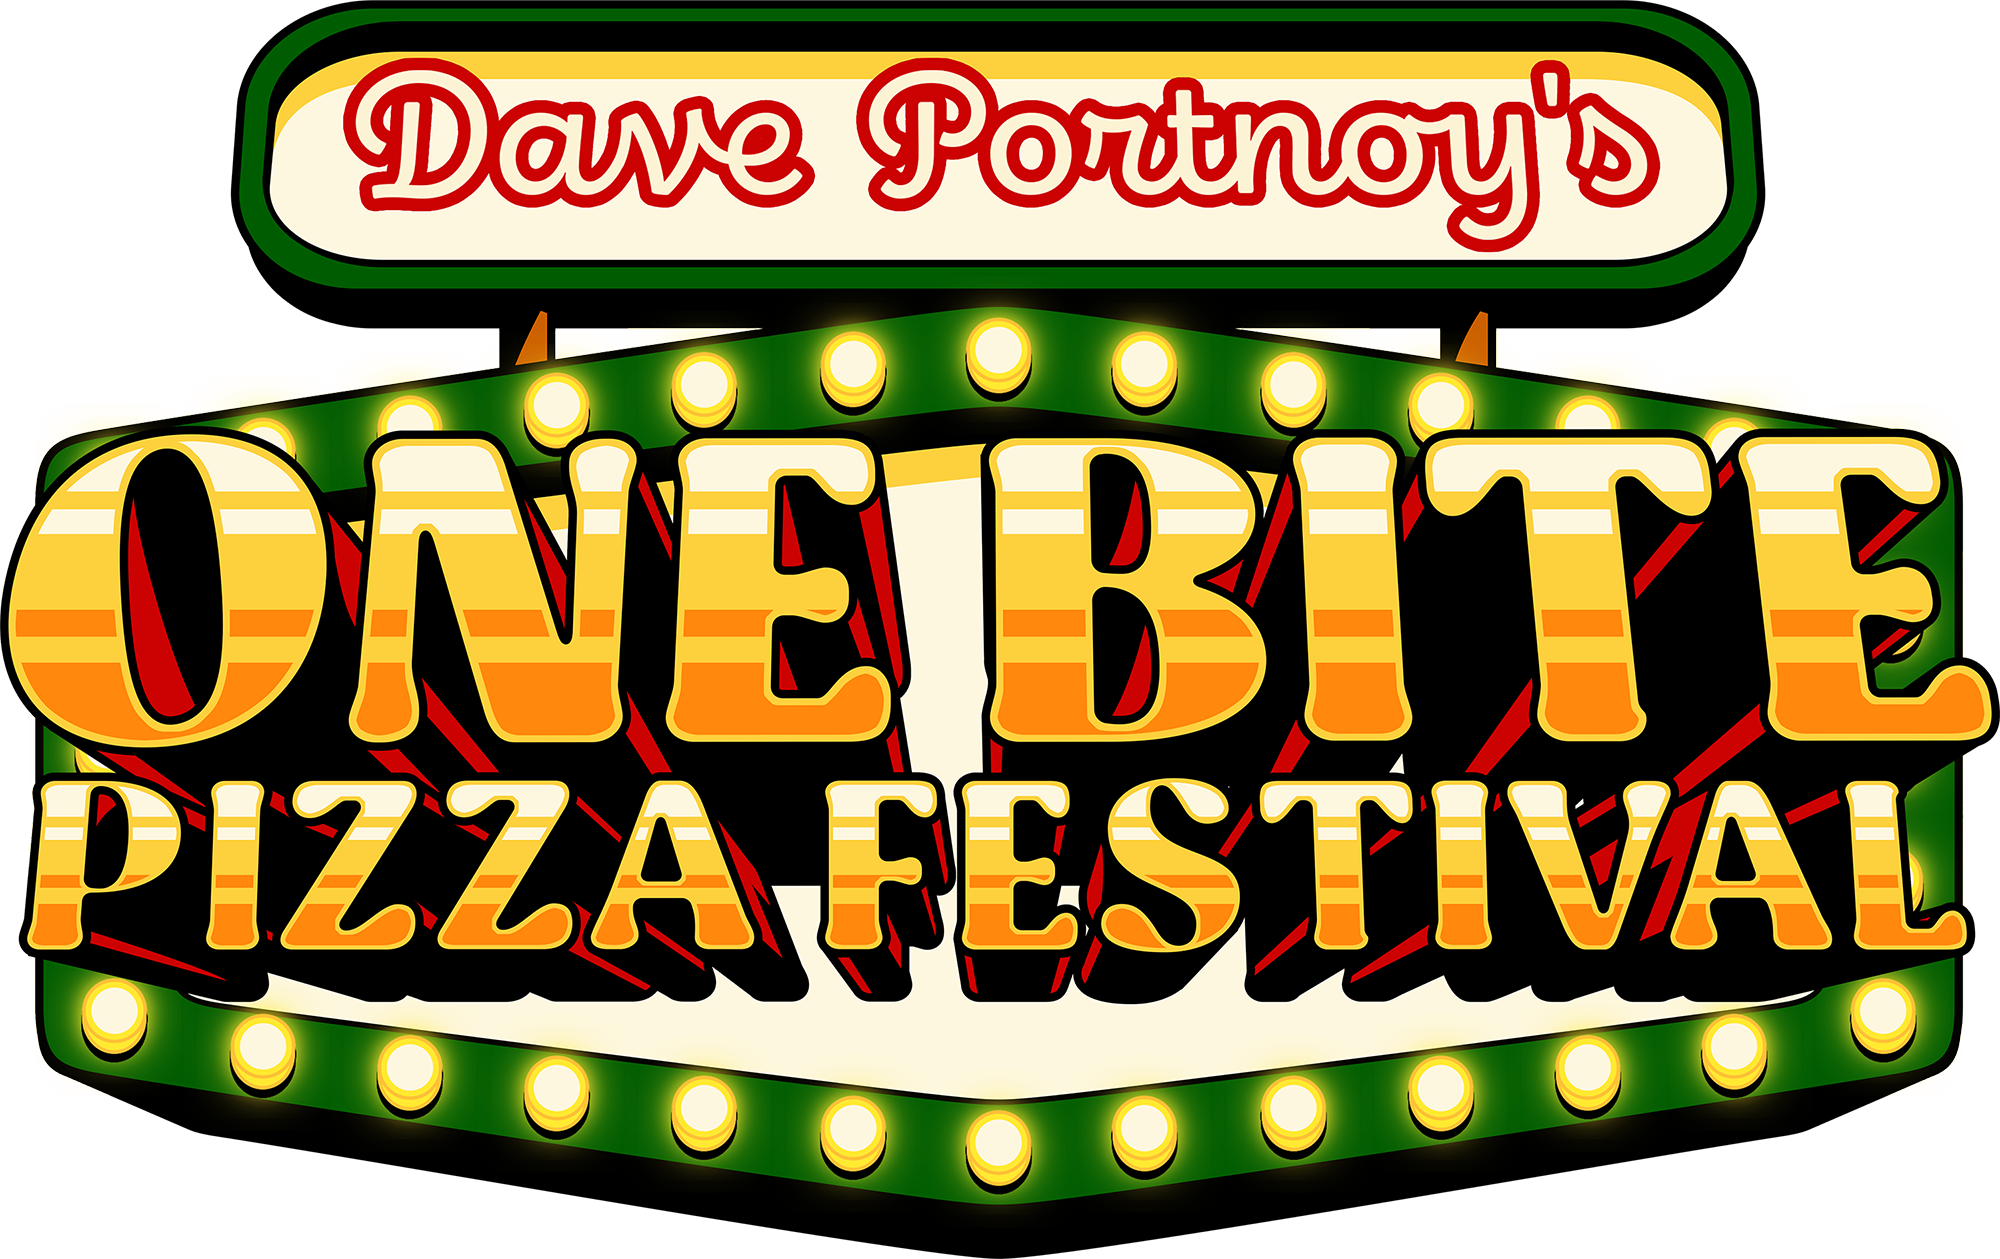 Dave Portnoy Is Launching His One Bite Pizza Festival in New York City